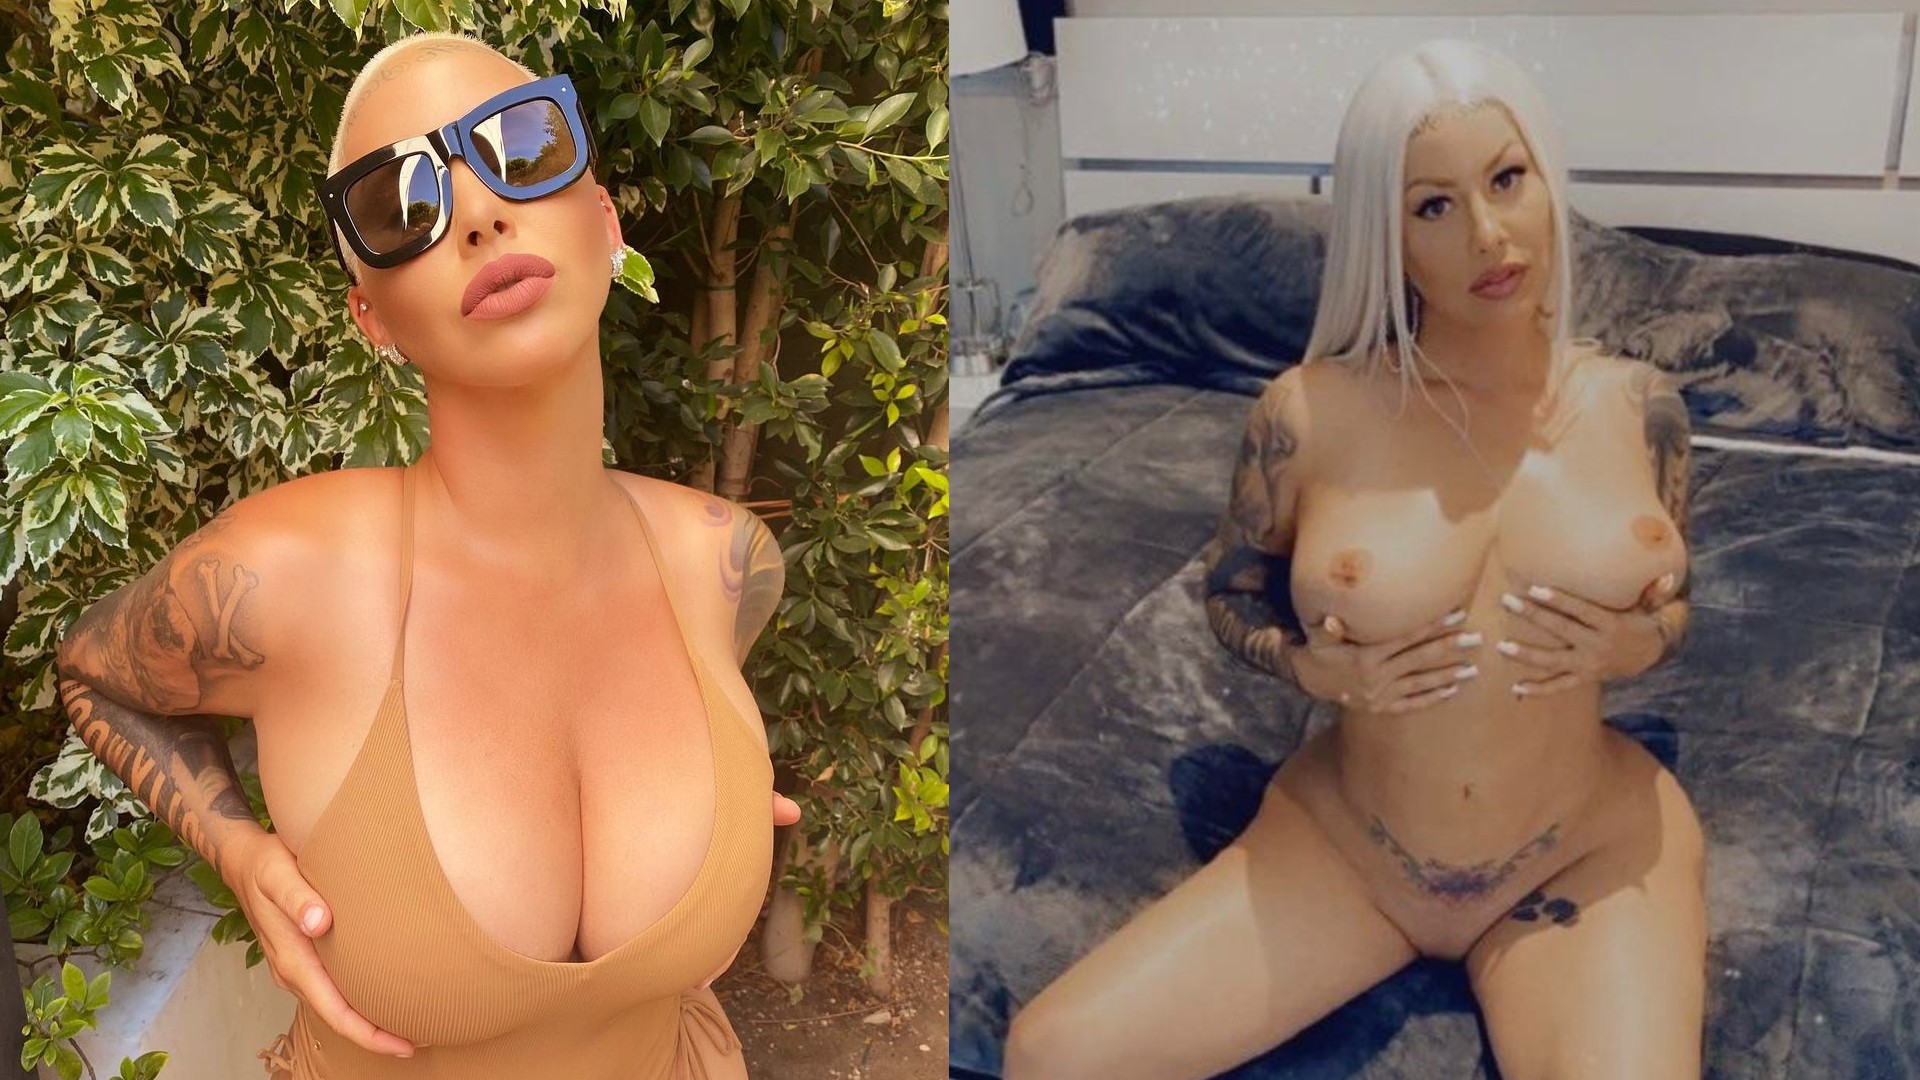 bobby konidaris recommends amber rose leaked nudes pic